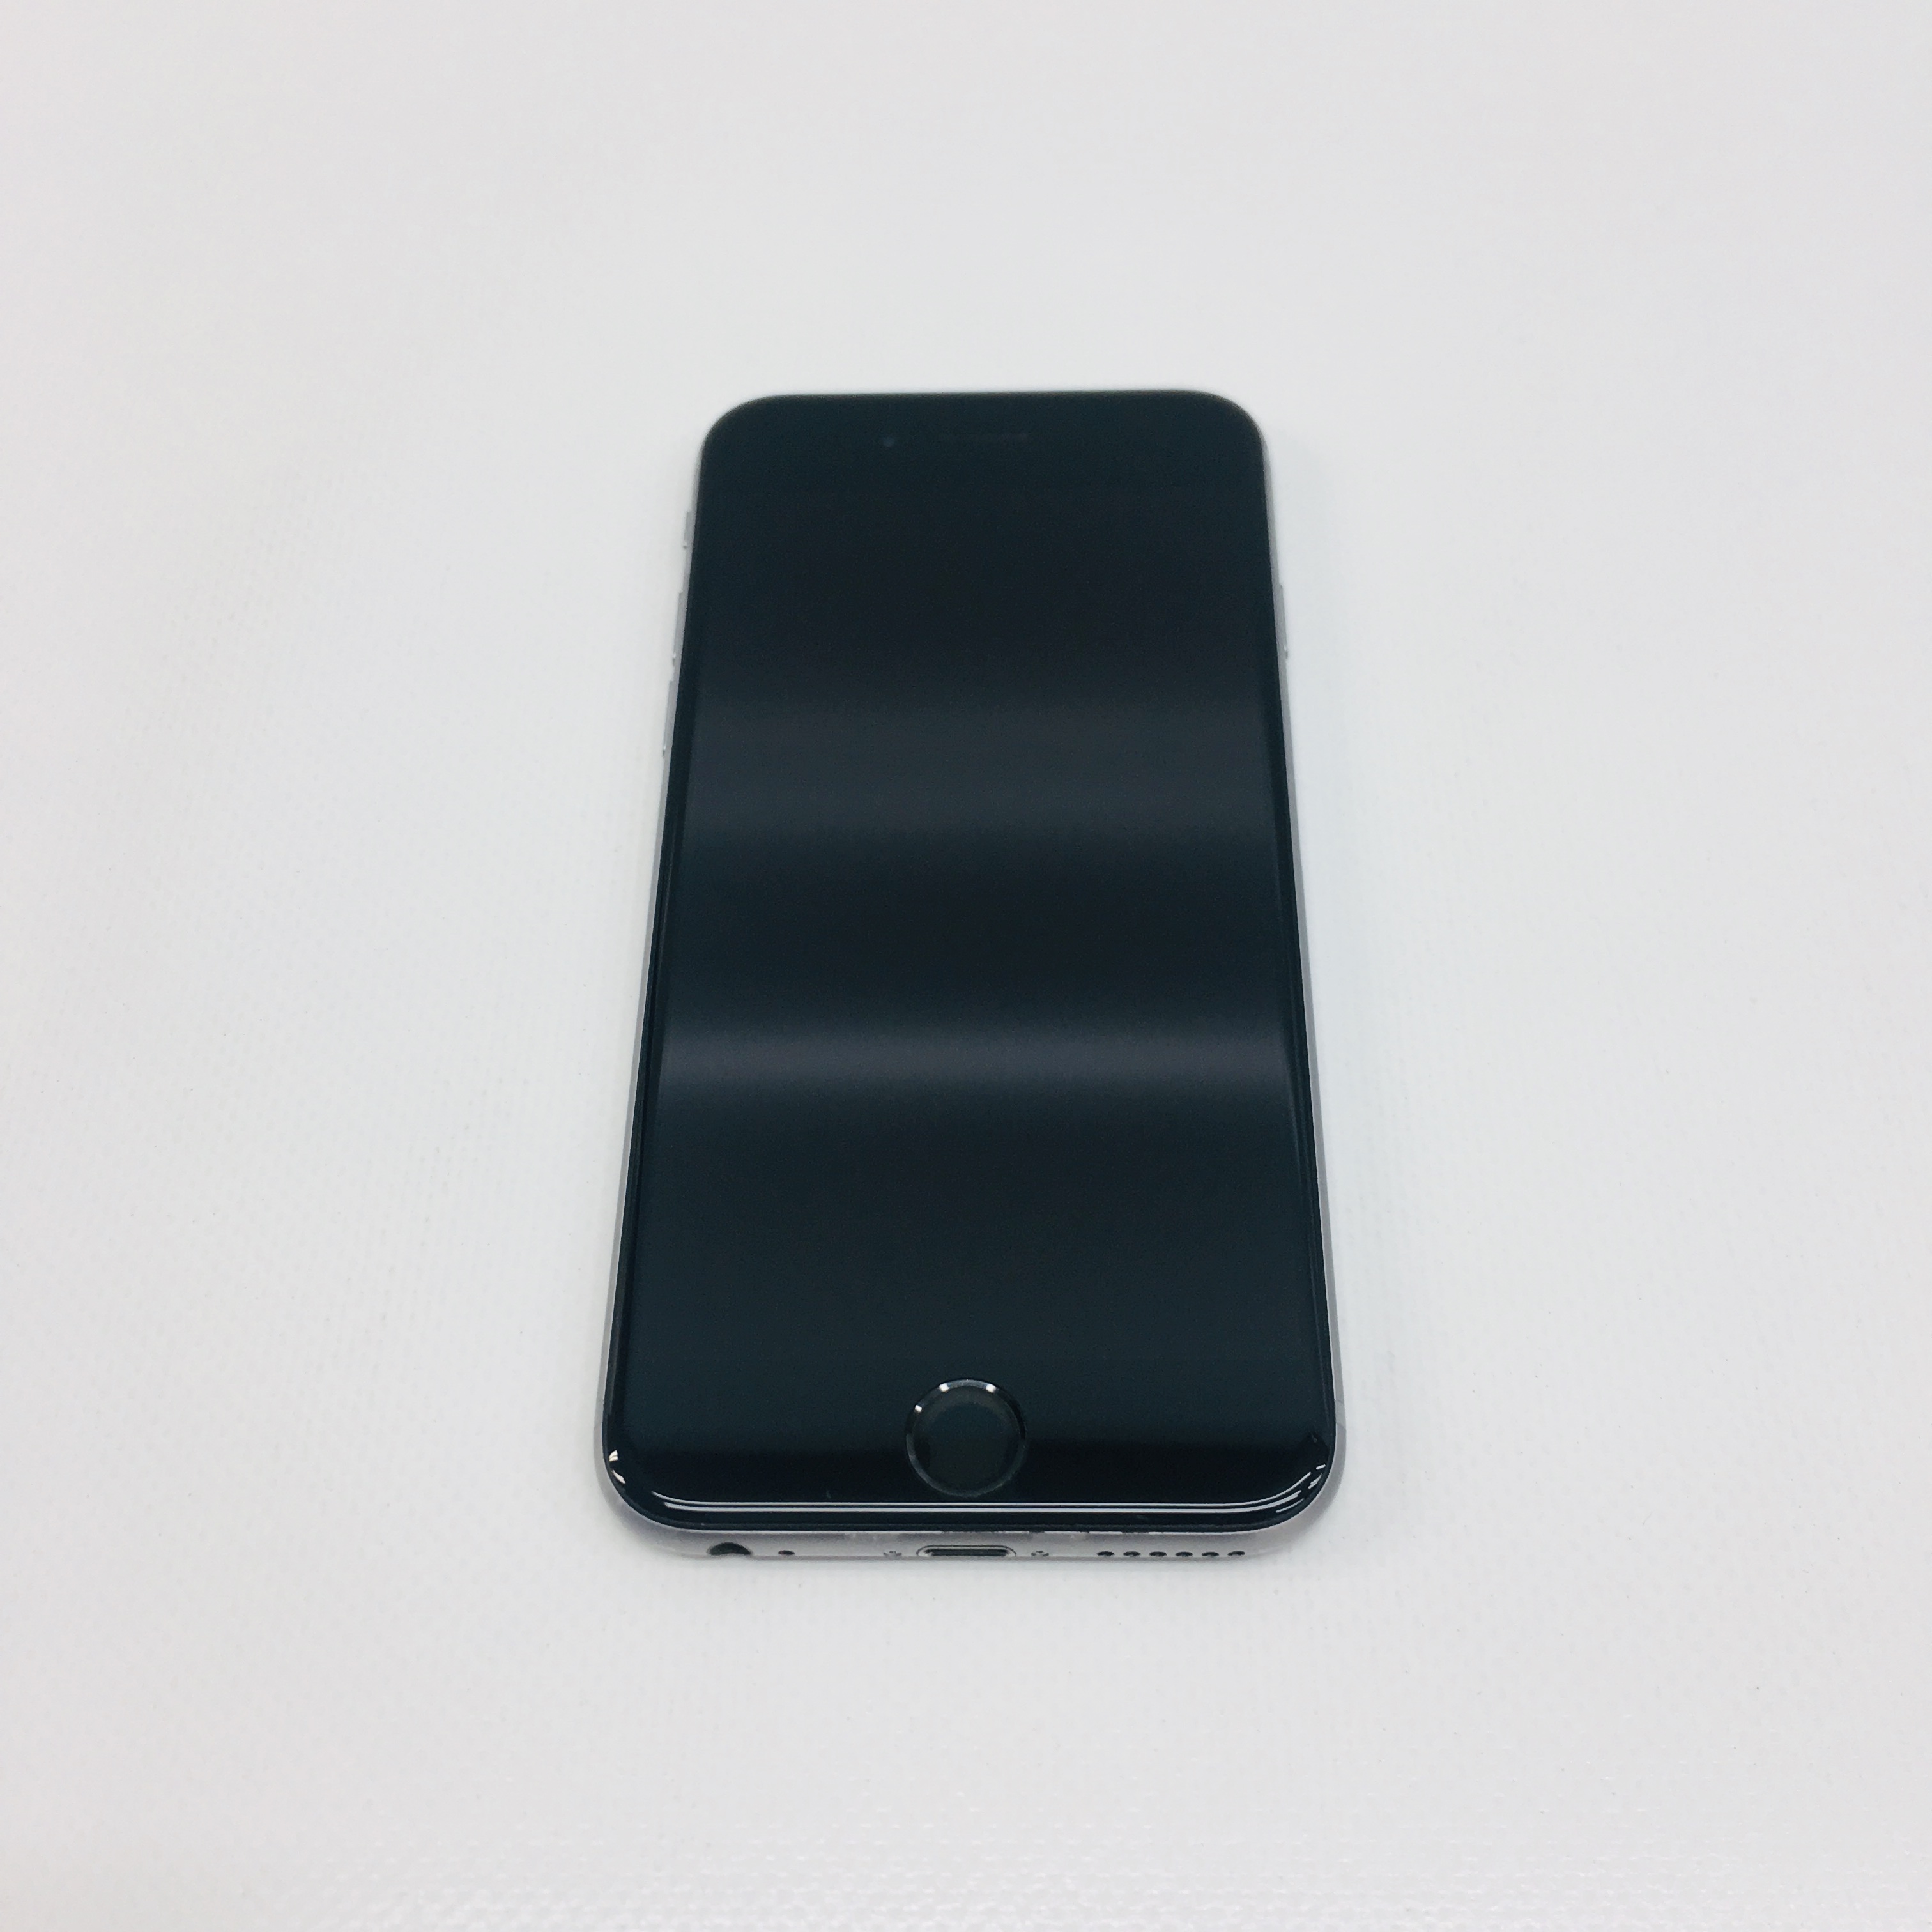 Fully Refurbished iPhone 6S 128GB / SPACE GREY - mResell.com.au